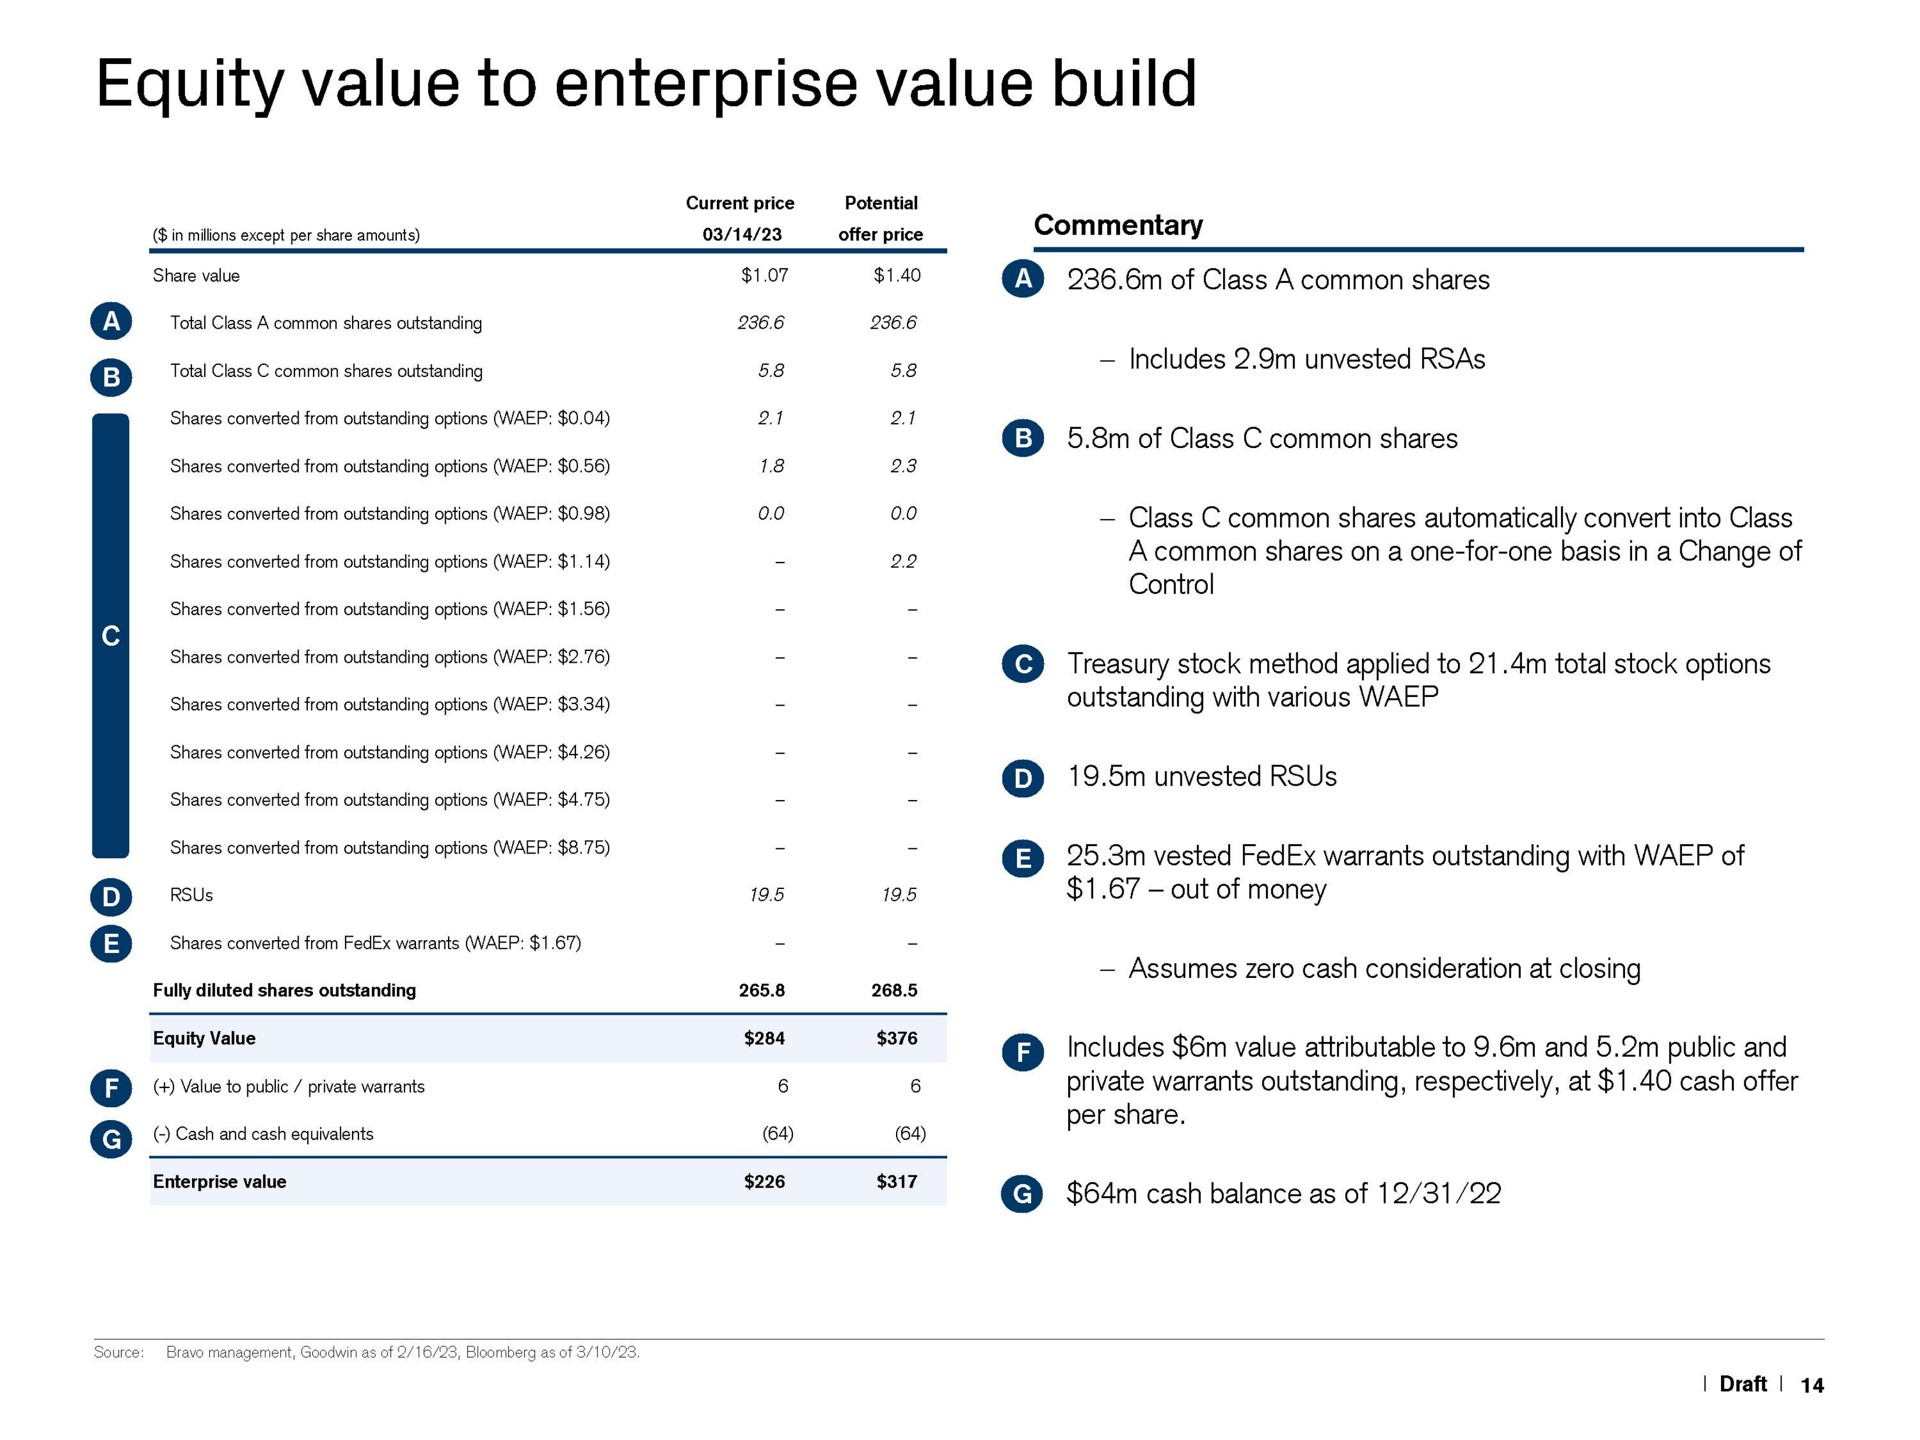 equity value to enterprise value build shares converted from outstanding options apices pee i of class a common shares of class common shares treasury stock method applied to total stock options unvested vested warrants outstanding with of out of money assumes zero cash consideration at includes value attributable to and public and share cash balance as of | Credit Suisse